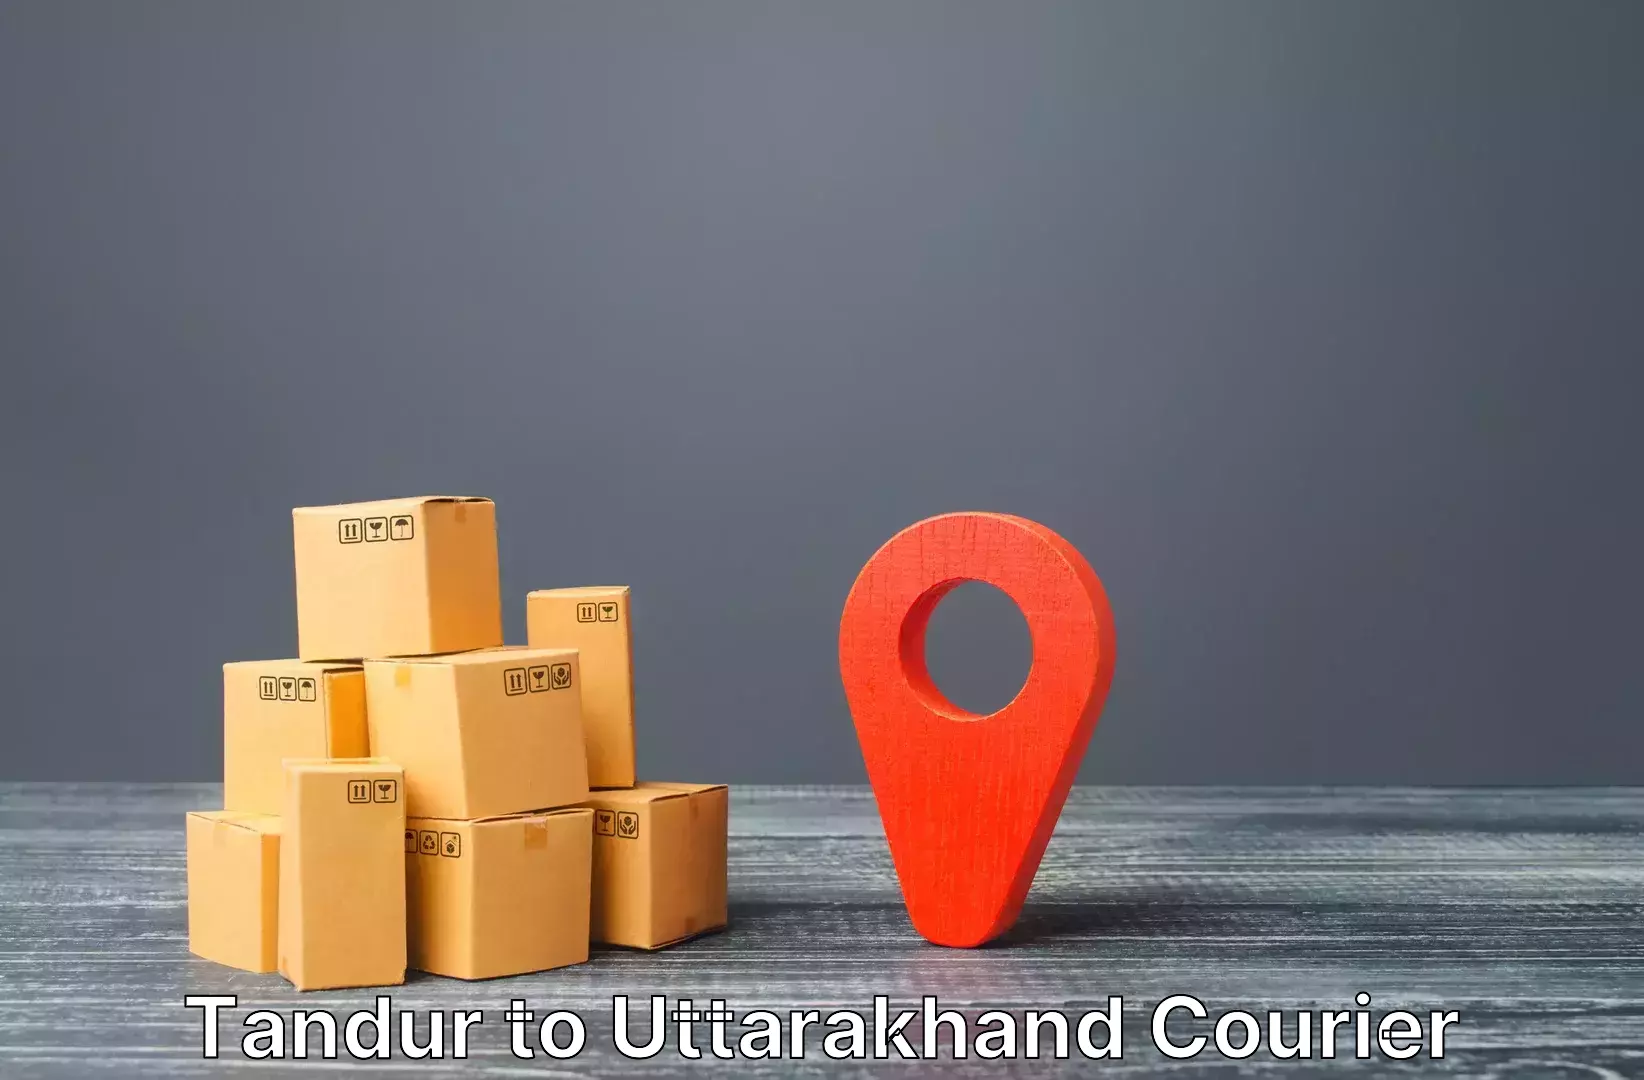 Reliable baggage delivery Tandur to Rishikesh